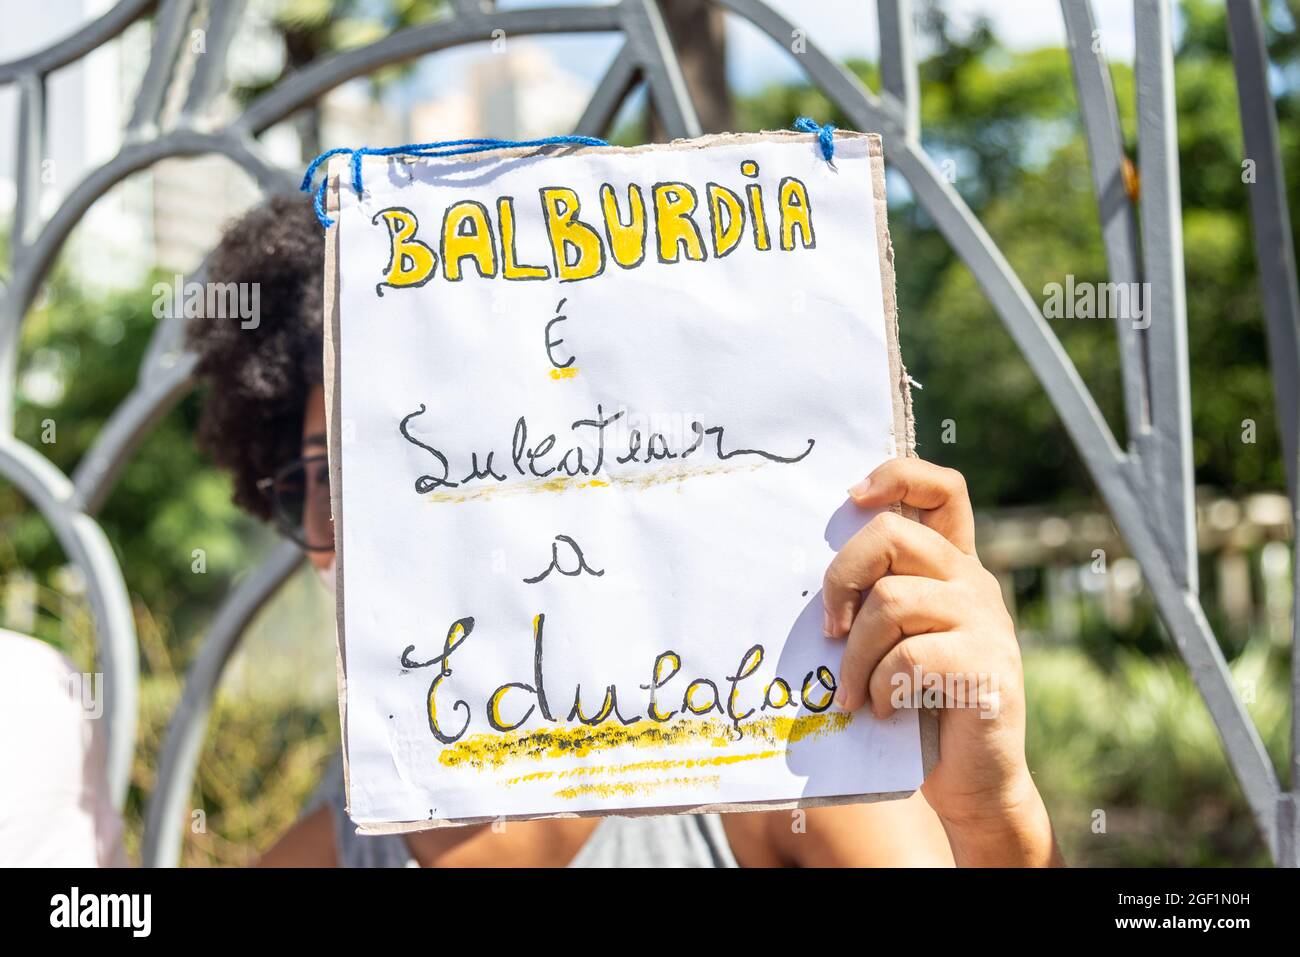 Salvador, Bahia, Brazil - May 29, 2021: Protesters protest against the government of President Jair Bolsonaro in the city of Salvador. Stock Photo